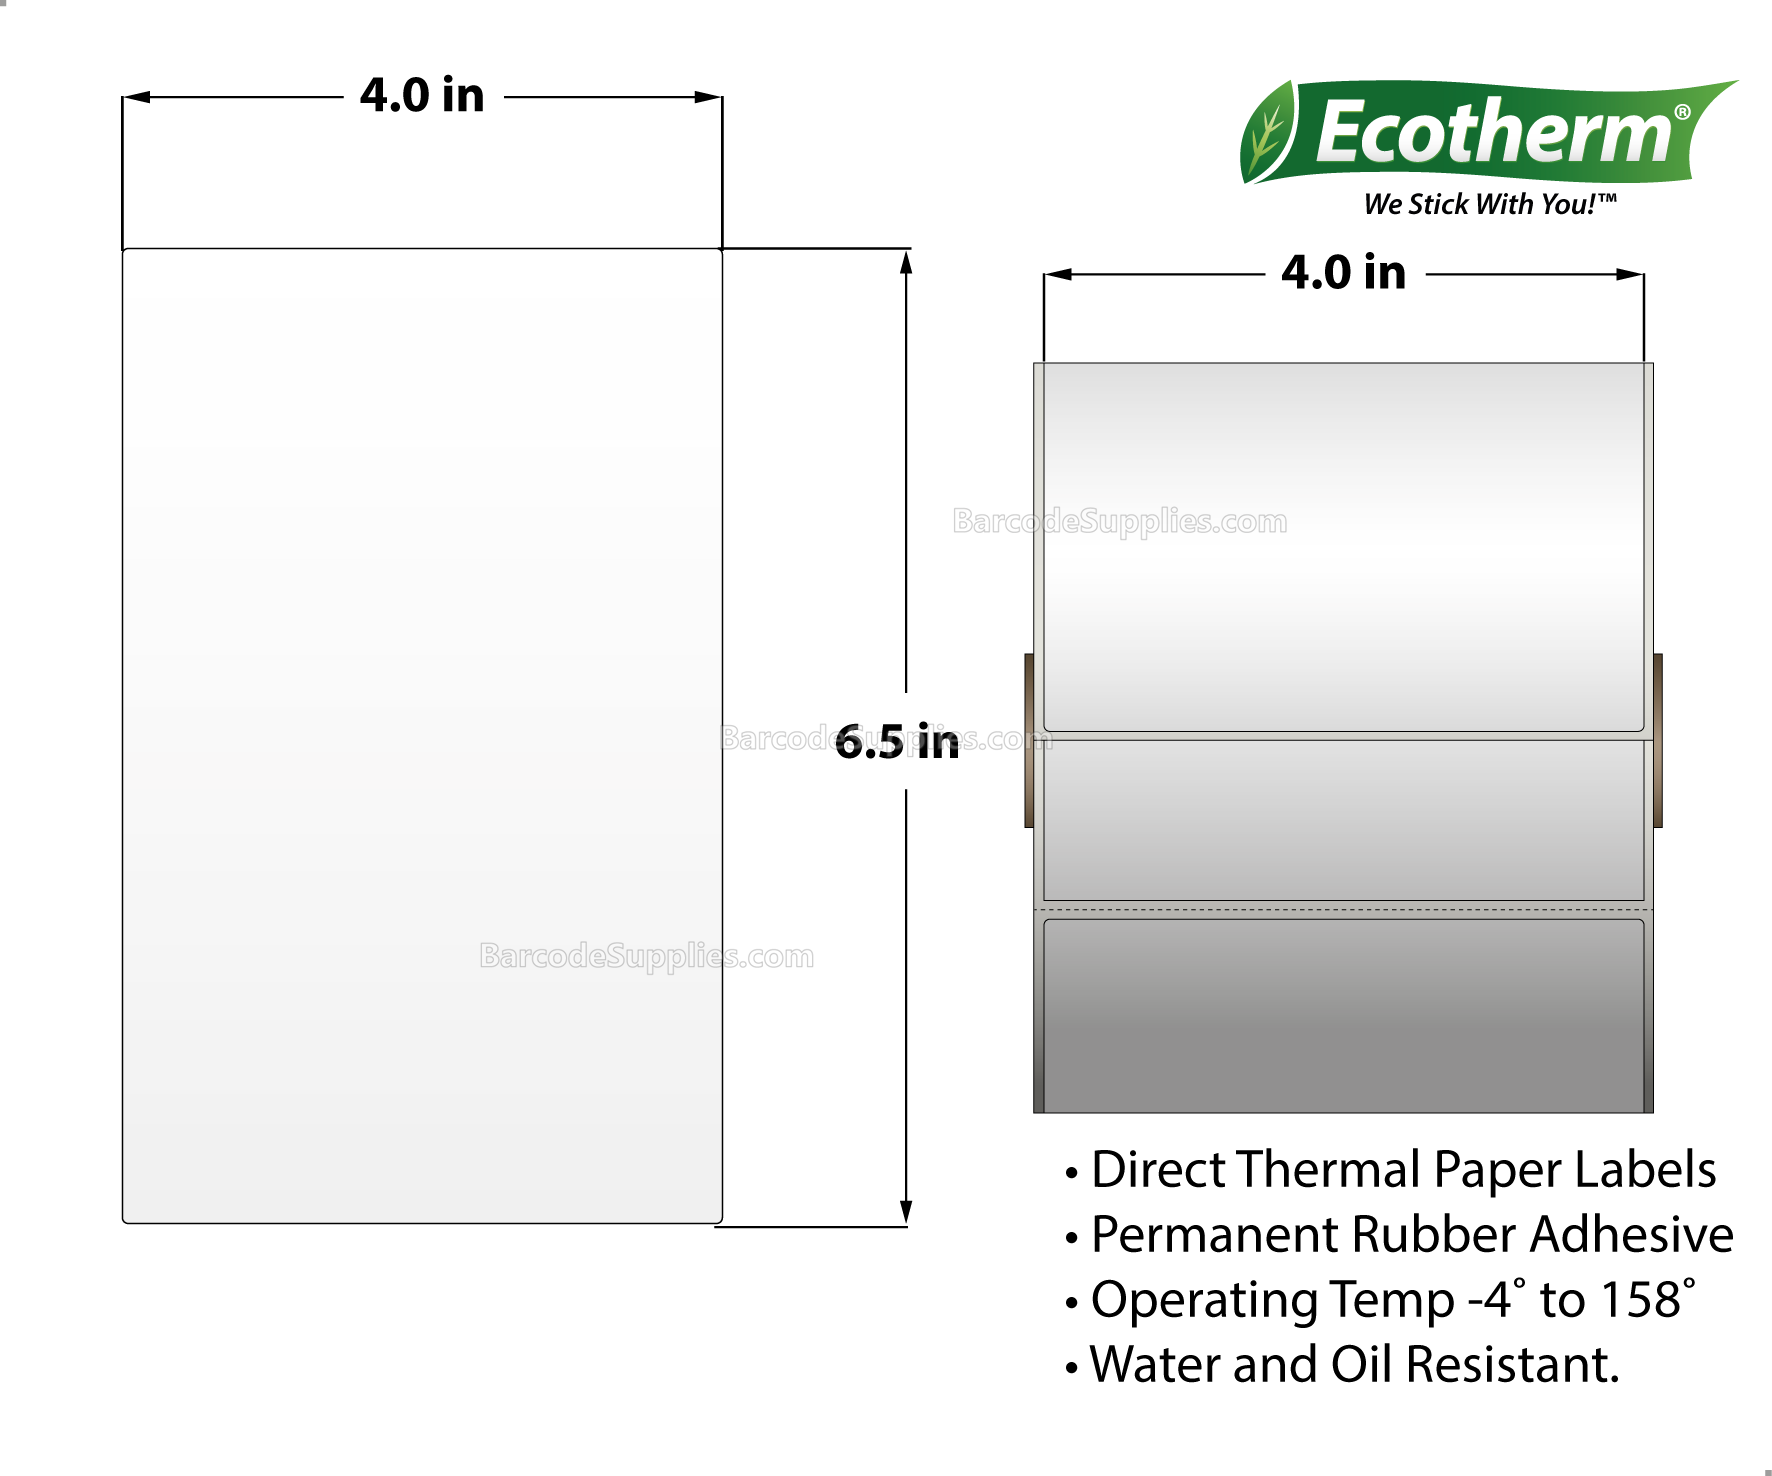 4 x 6.5 Direct Thermal White Labels With Rubber Adhesive - Perforated - 380 Labels Per Roll - Carton Of 6 Rolls - 2280 Labels Total - MPN: ECOTHERM15156-6